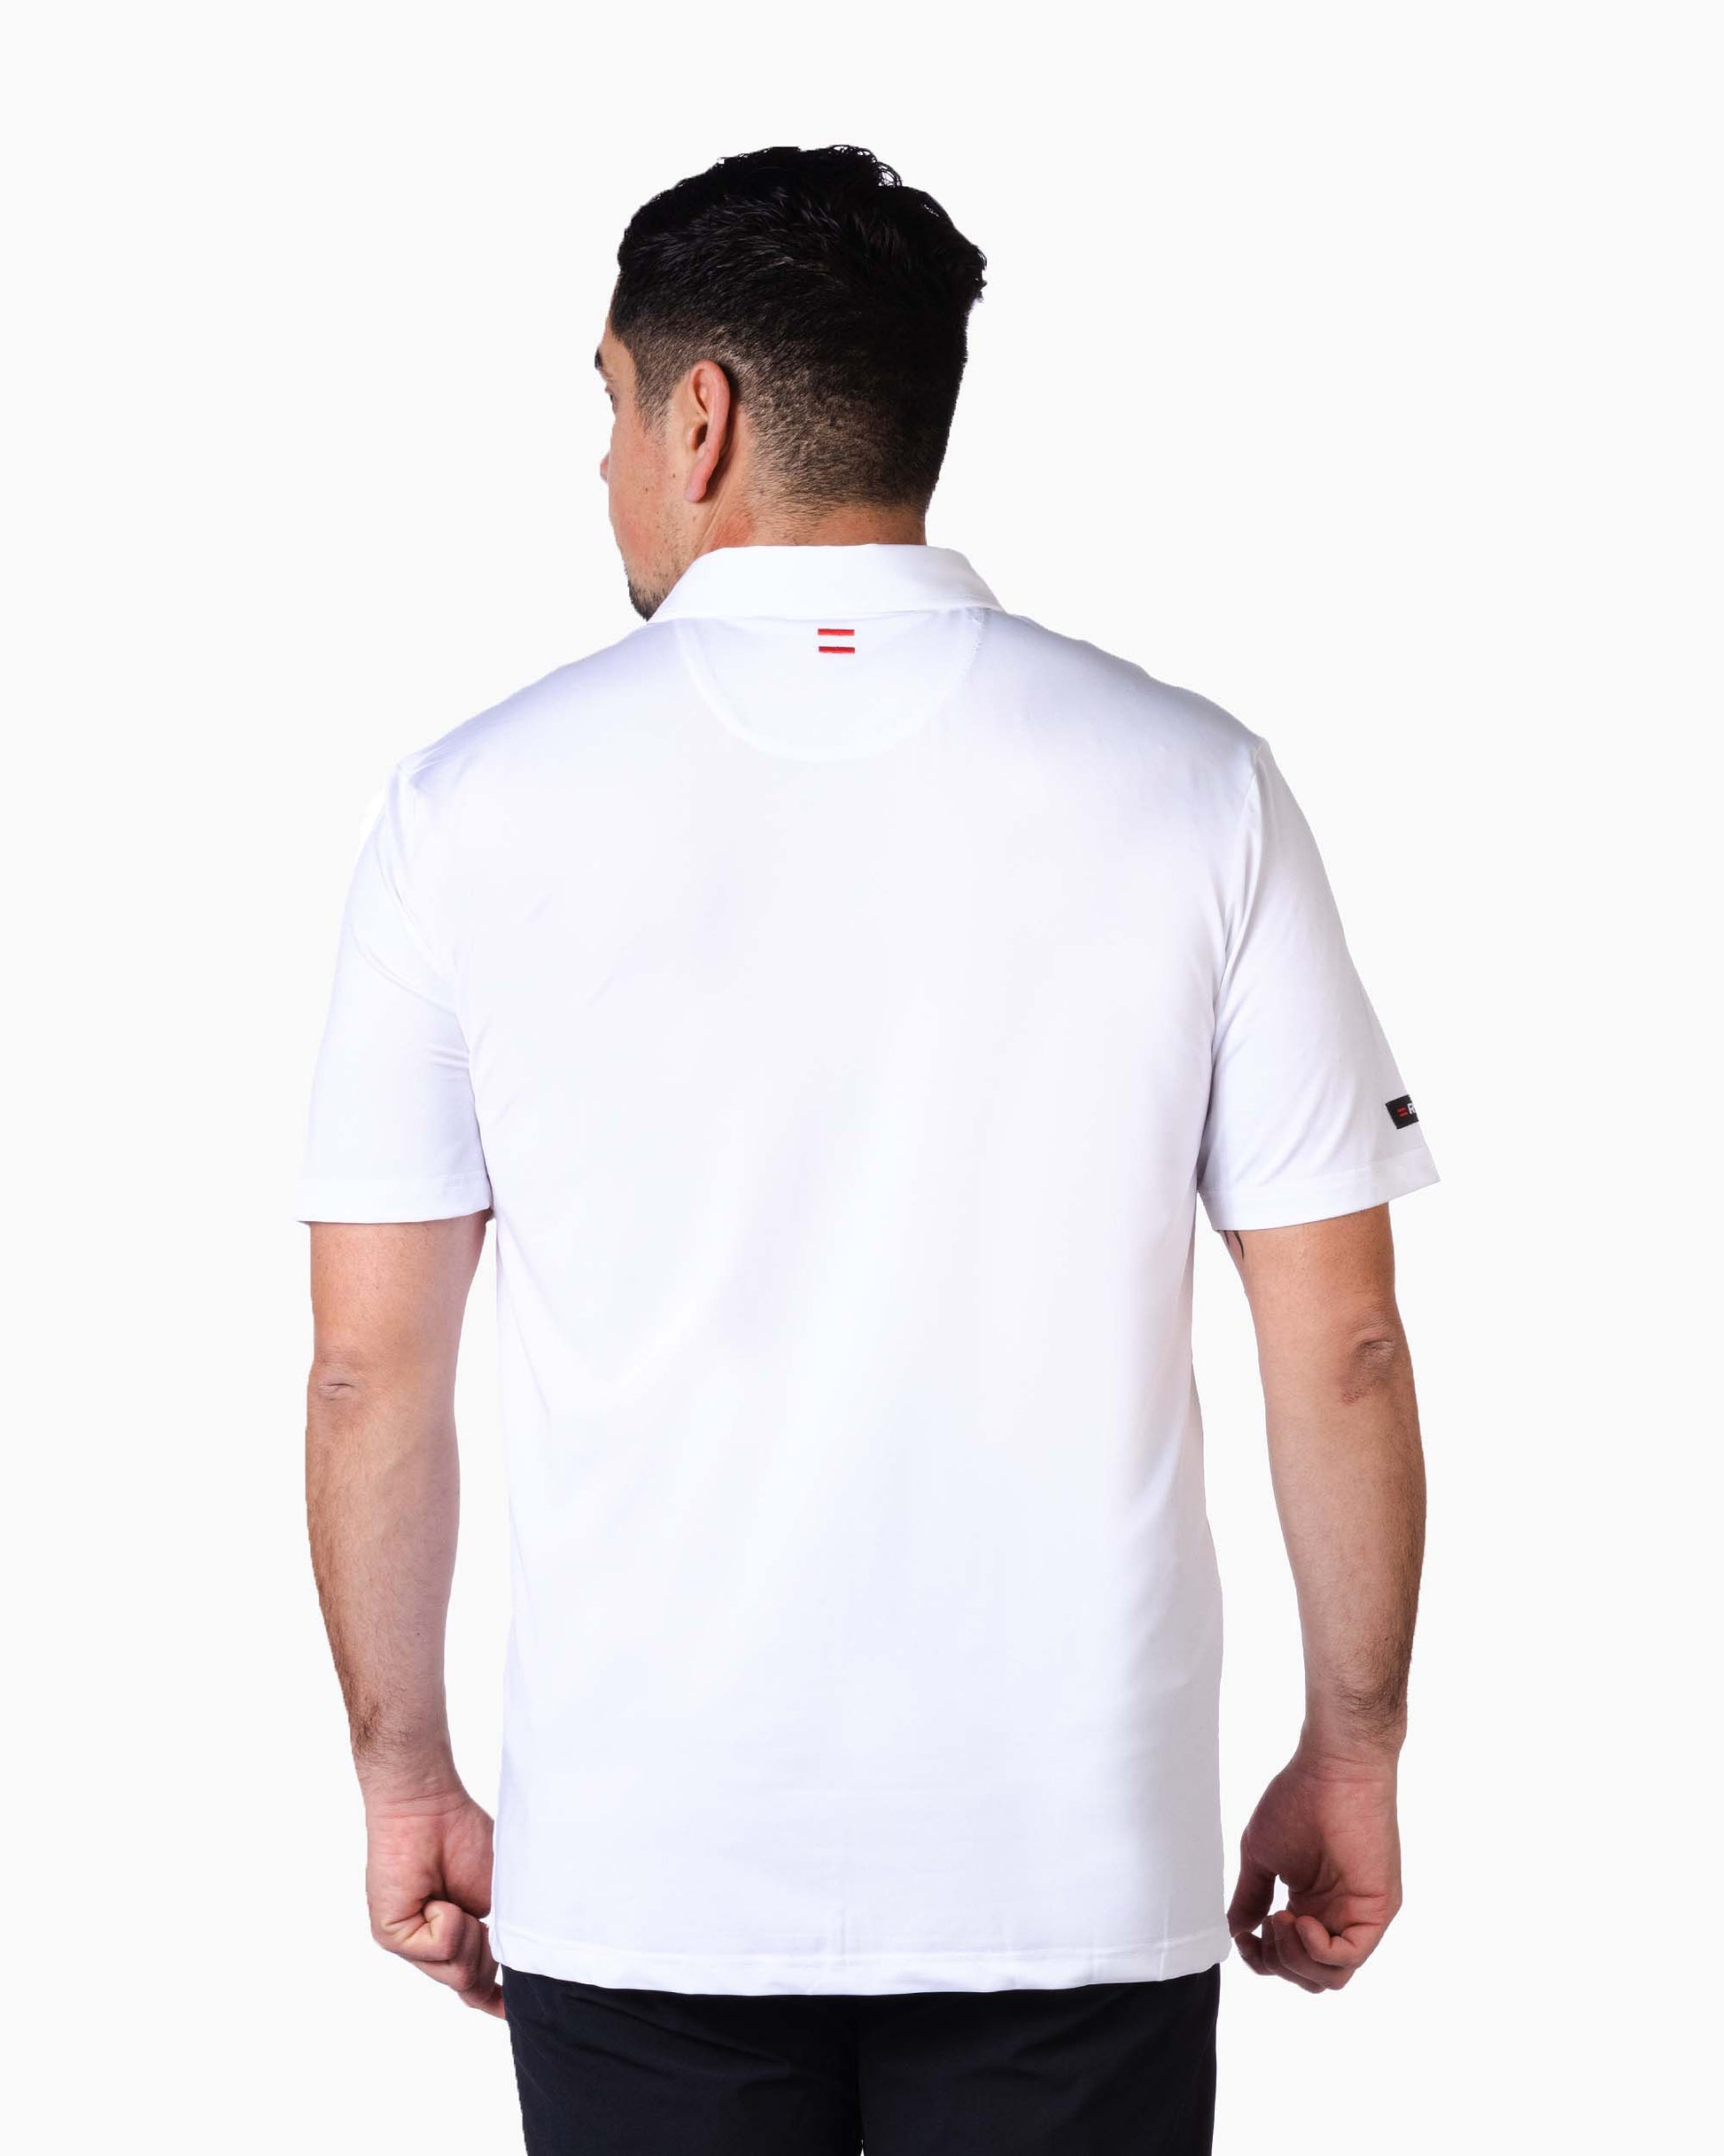 back of man wearing white polo with two red stripes on neck